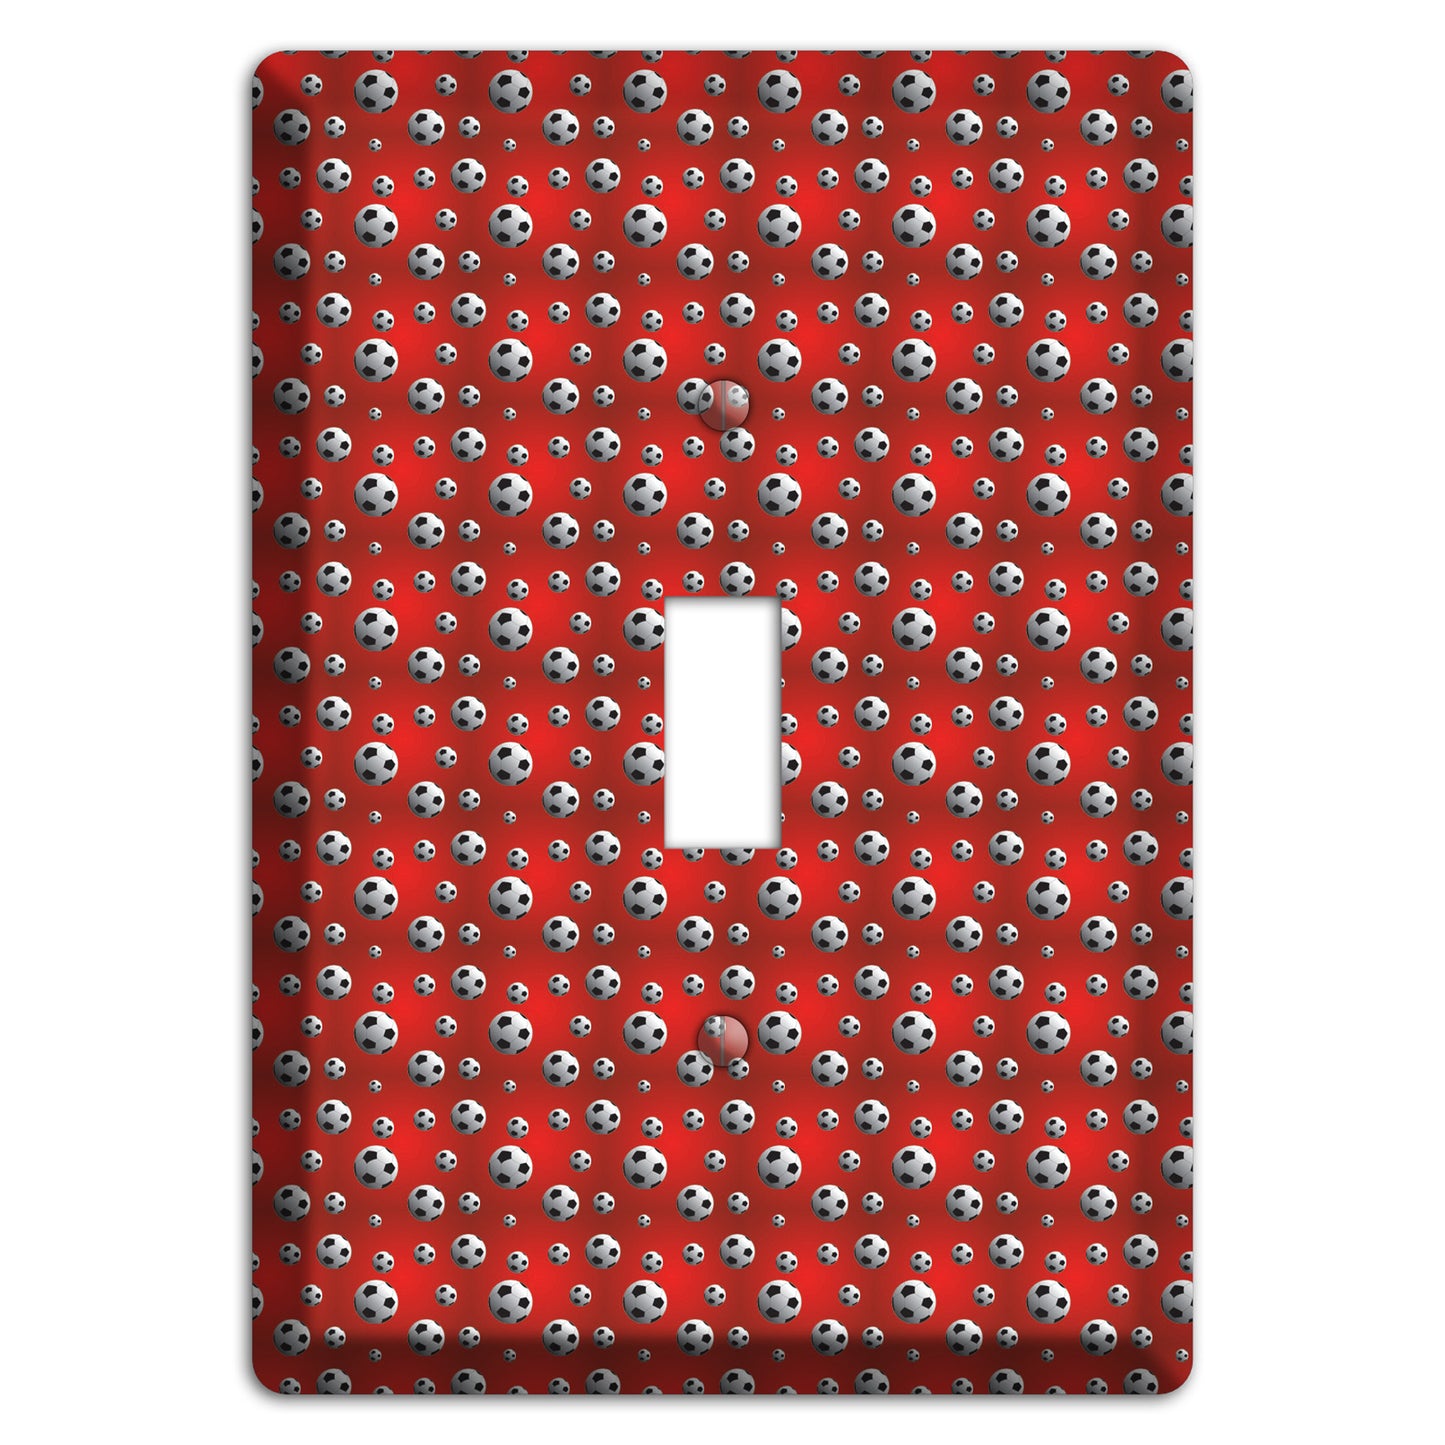 Red with Soccer Balls Cover Plates